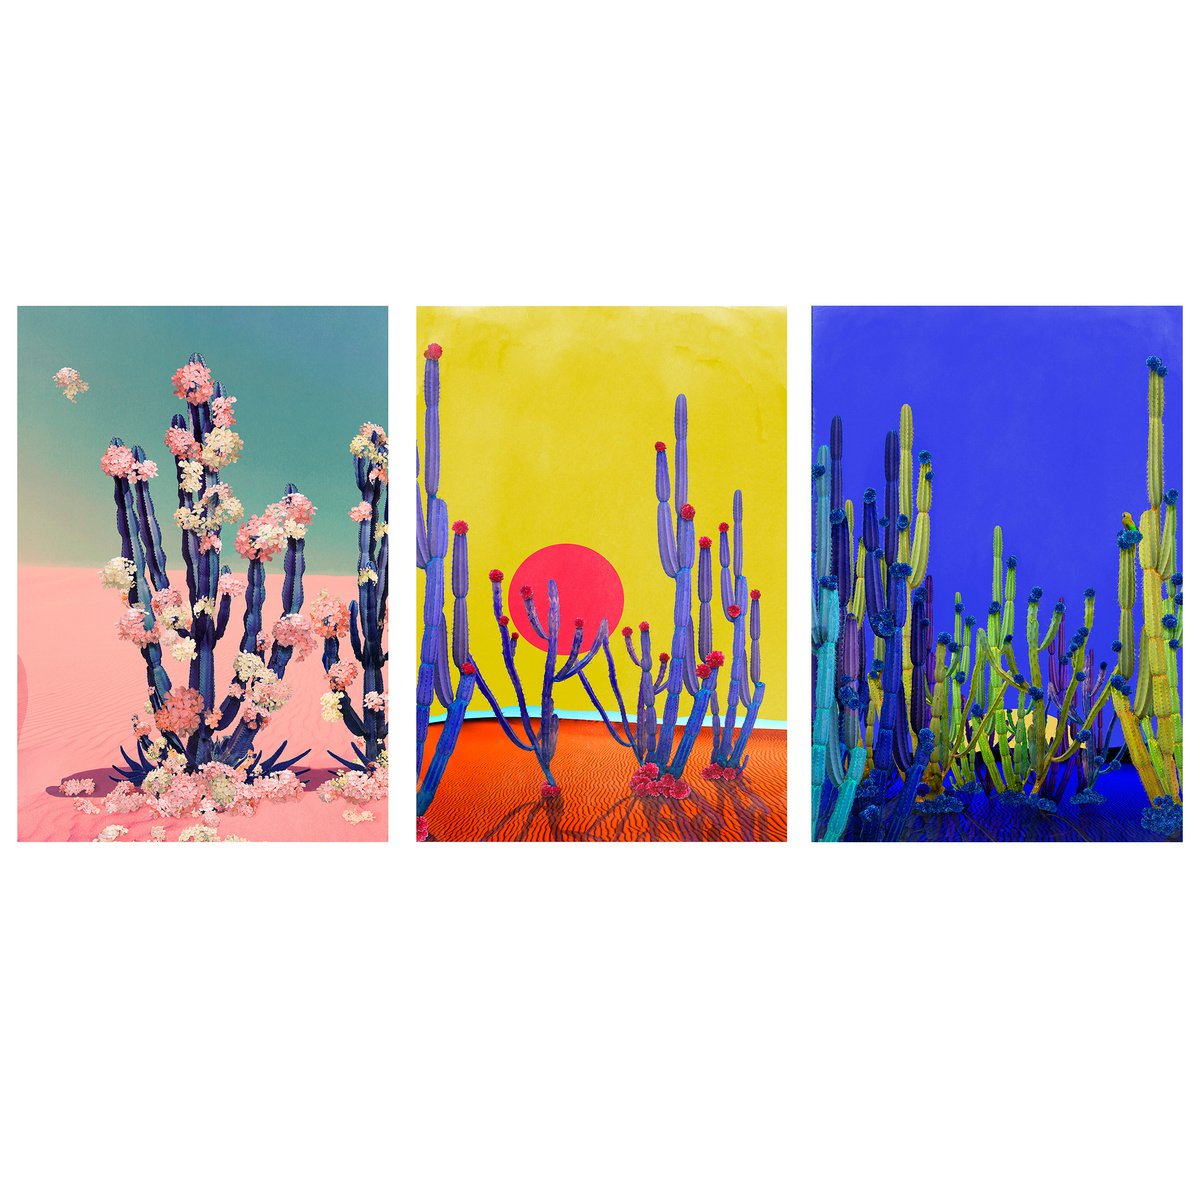 Cactus Flower, Cactus Blue, Cactus Sunset  - all Framed by Nadia  Attura